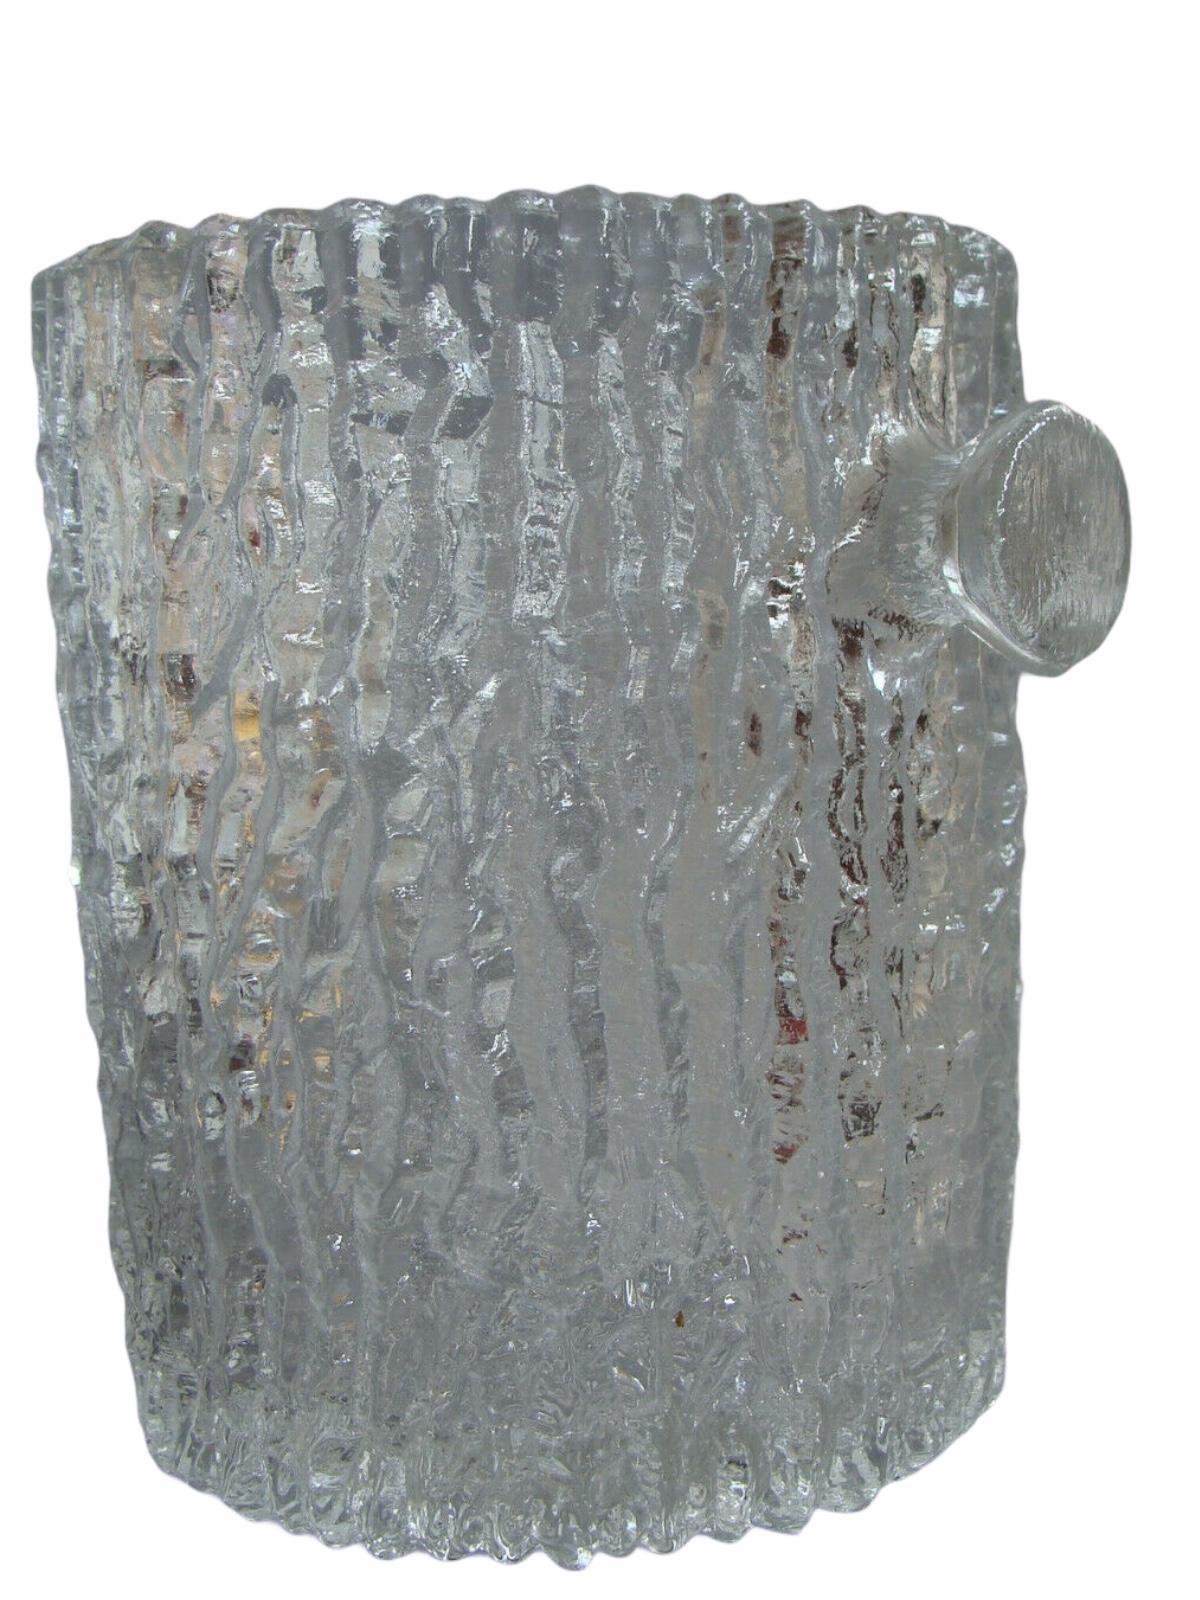 Faux Leather Mid-Century Modern Glass Ice Bucket with Leatherette Cover, Germany, 1970s For Sale